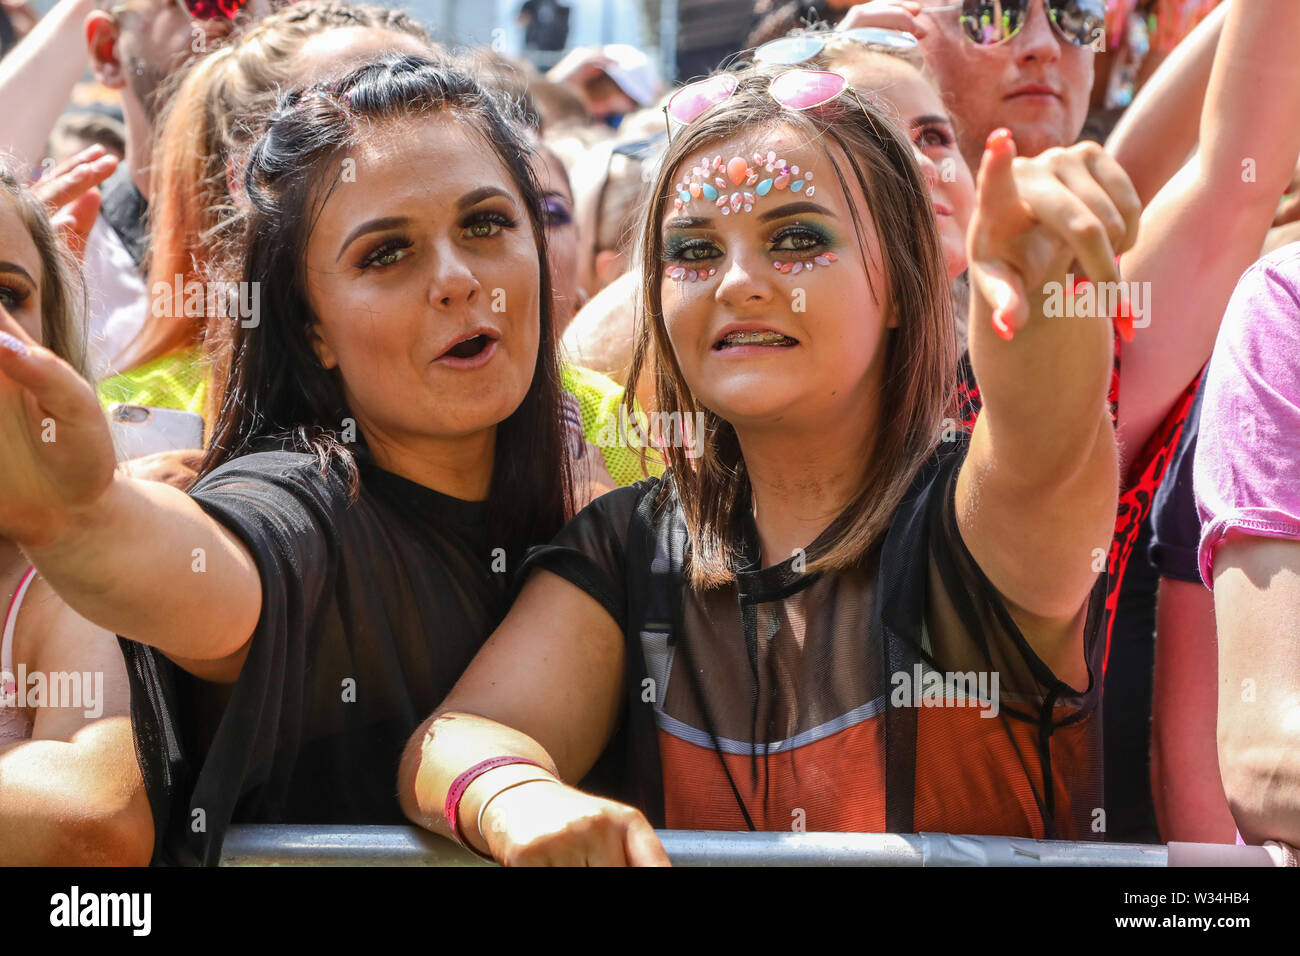 Glasgow, Scotland, UK. 12th July, 2019. Glasgow hosts  the annual TRNSMT open air music festival in Glasgow Green, with an audience of thousands enjoying the music on a sunny summers day. Credit: Findlay/Alamy Live News Stock Photo